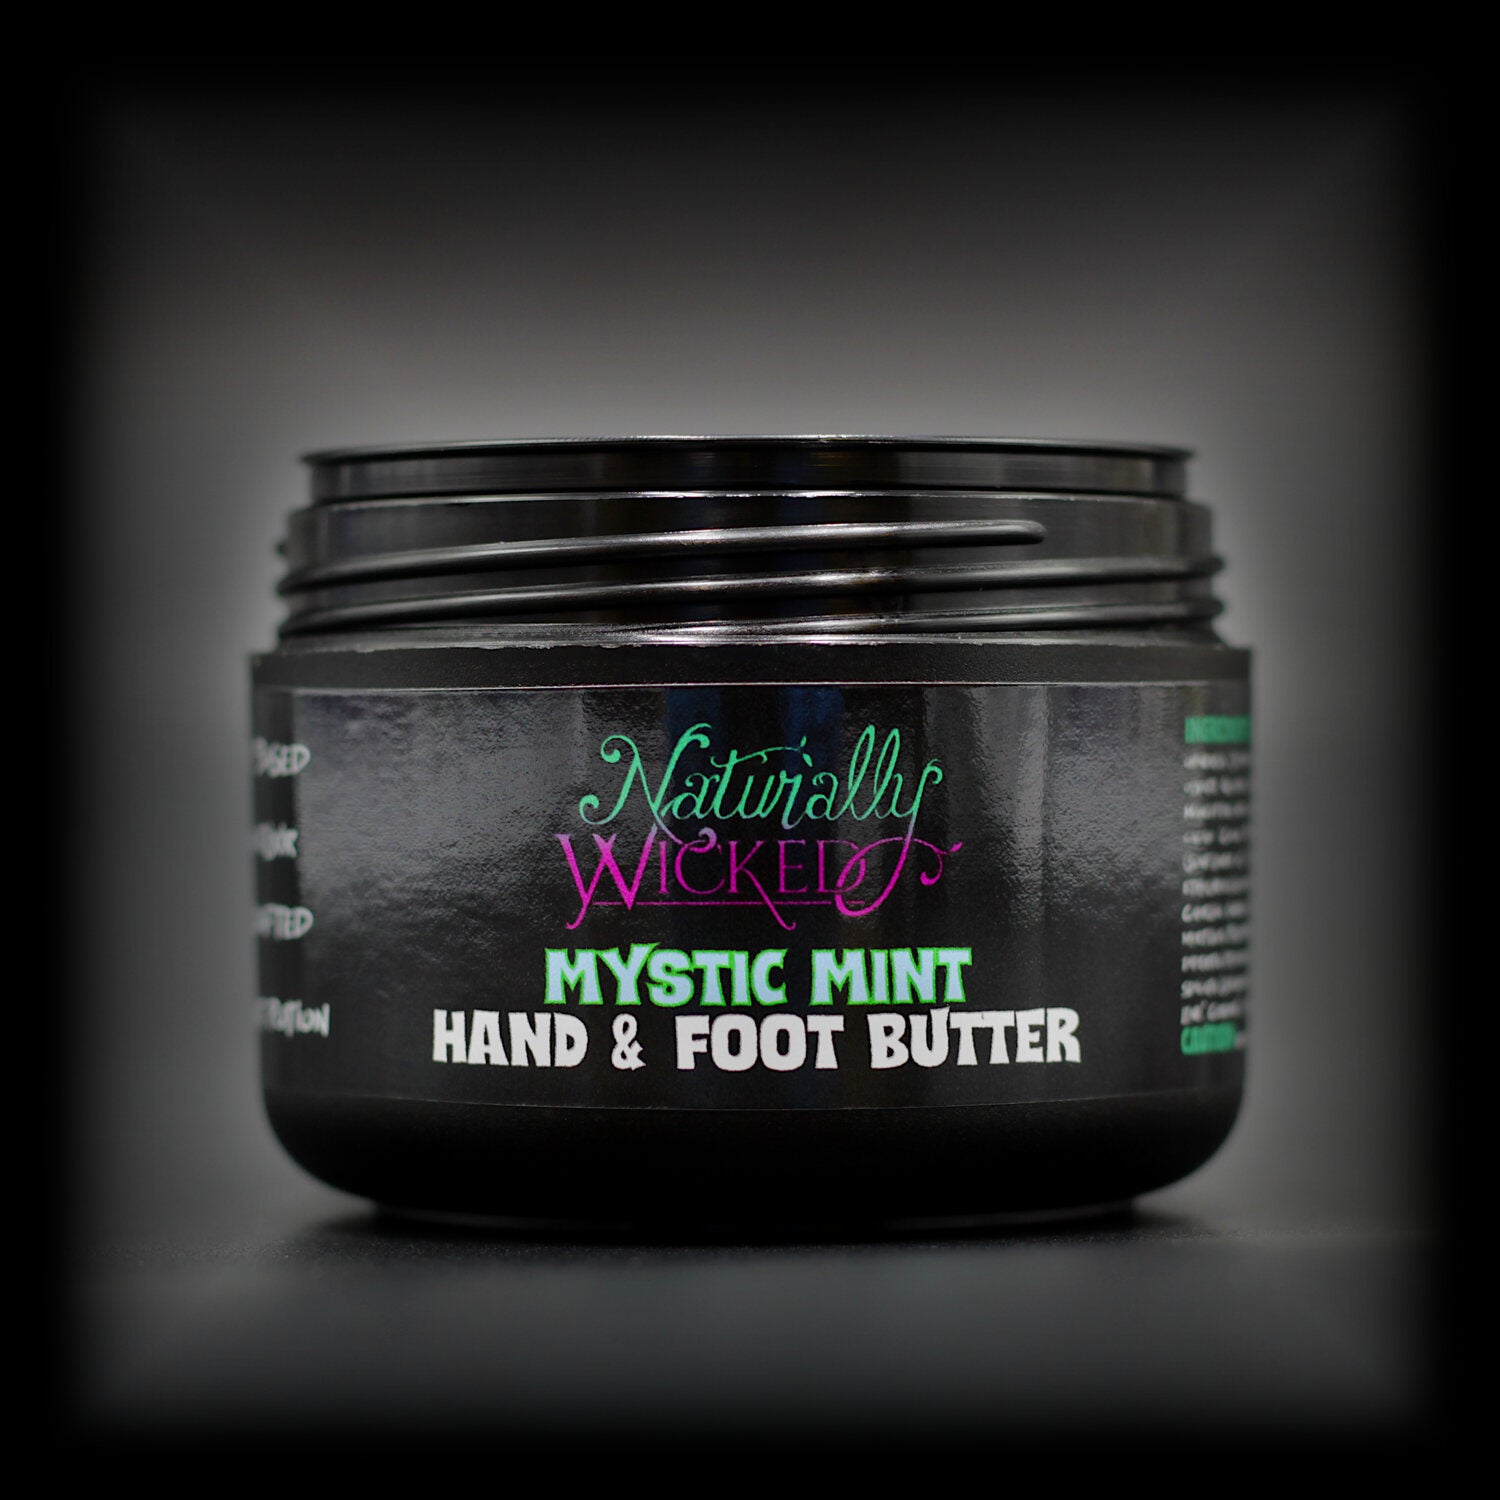 Naturally Wicked Mystic Mint Hand & Foot Butter With Lid Removed Exposing Inner Luxury Container Seal